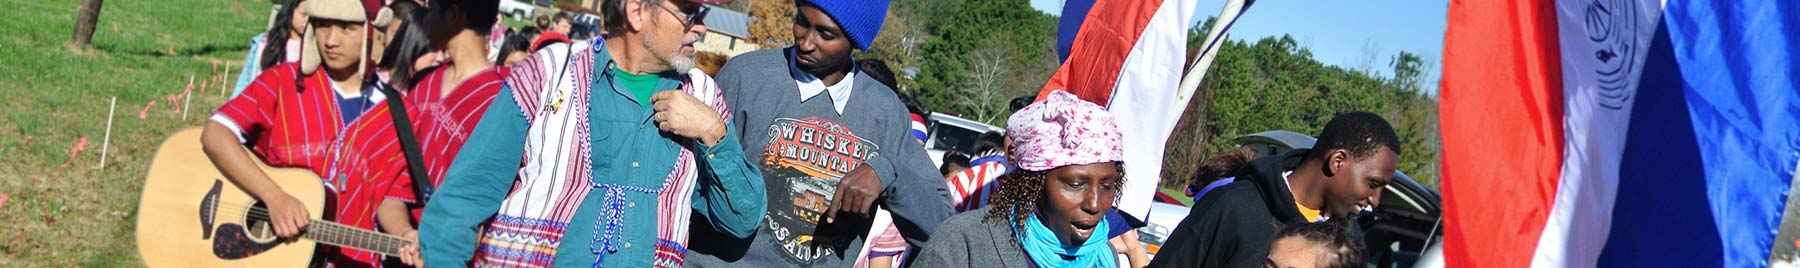 Refugees and Jubilee staff lead the local Christmas parade in Comer, Georgia.